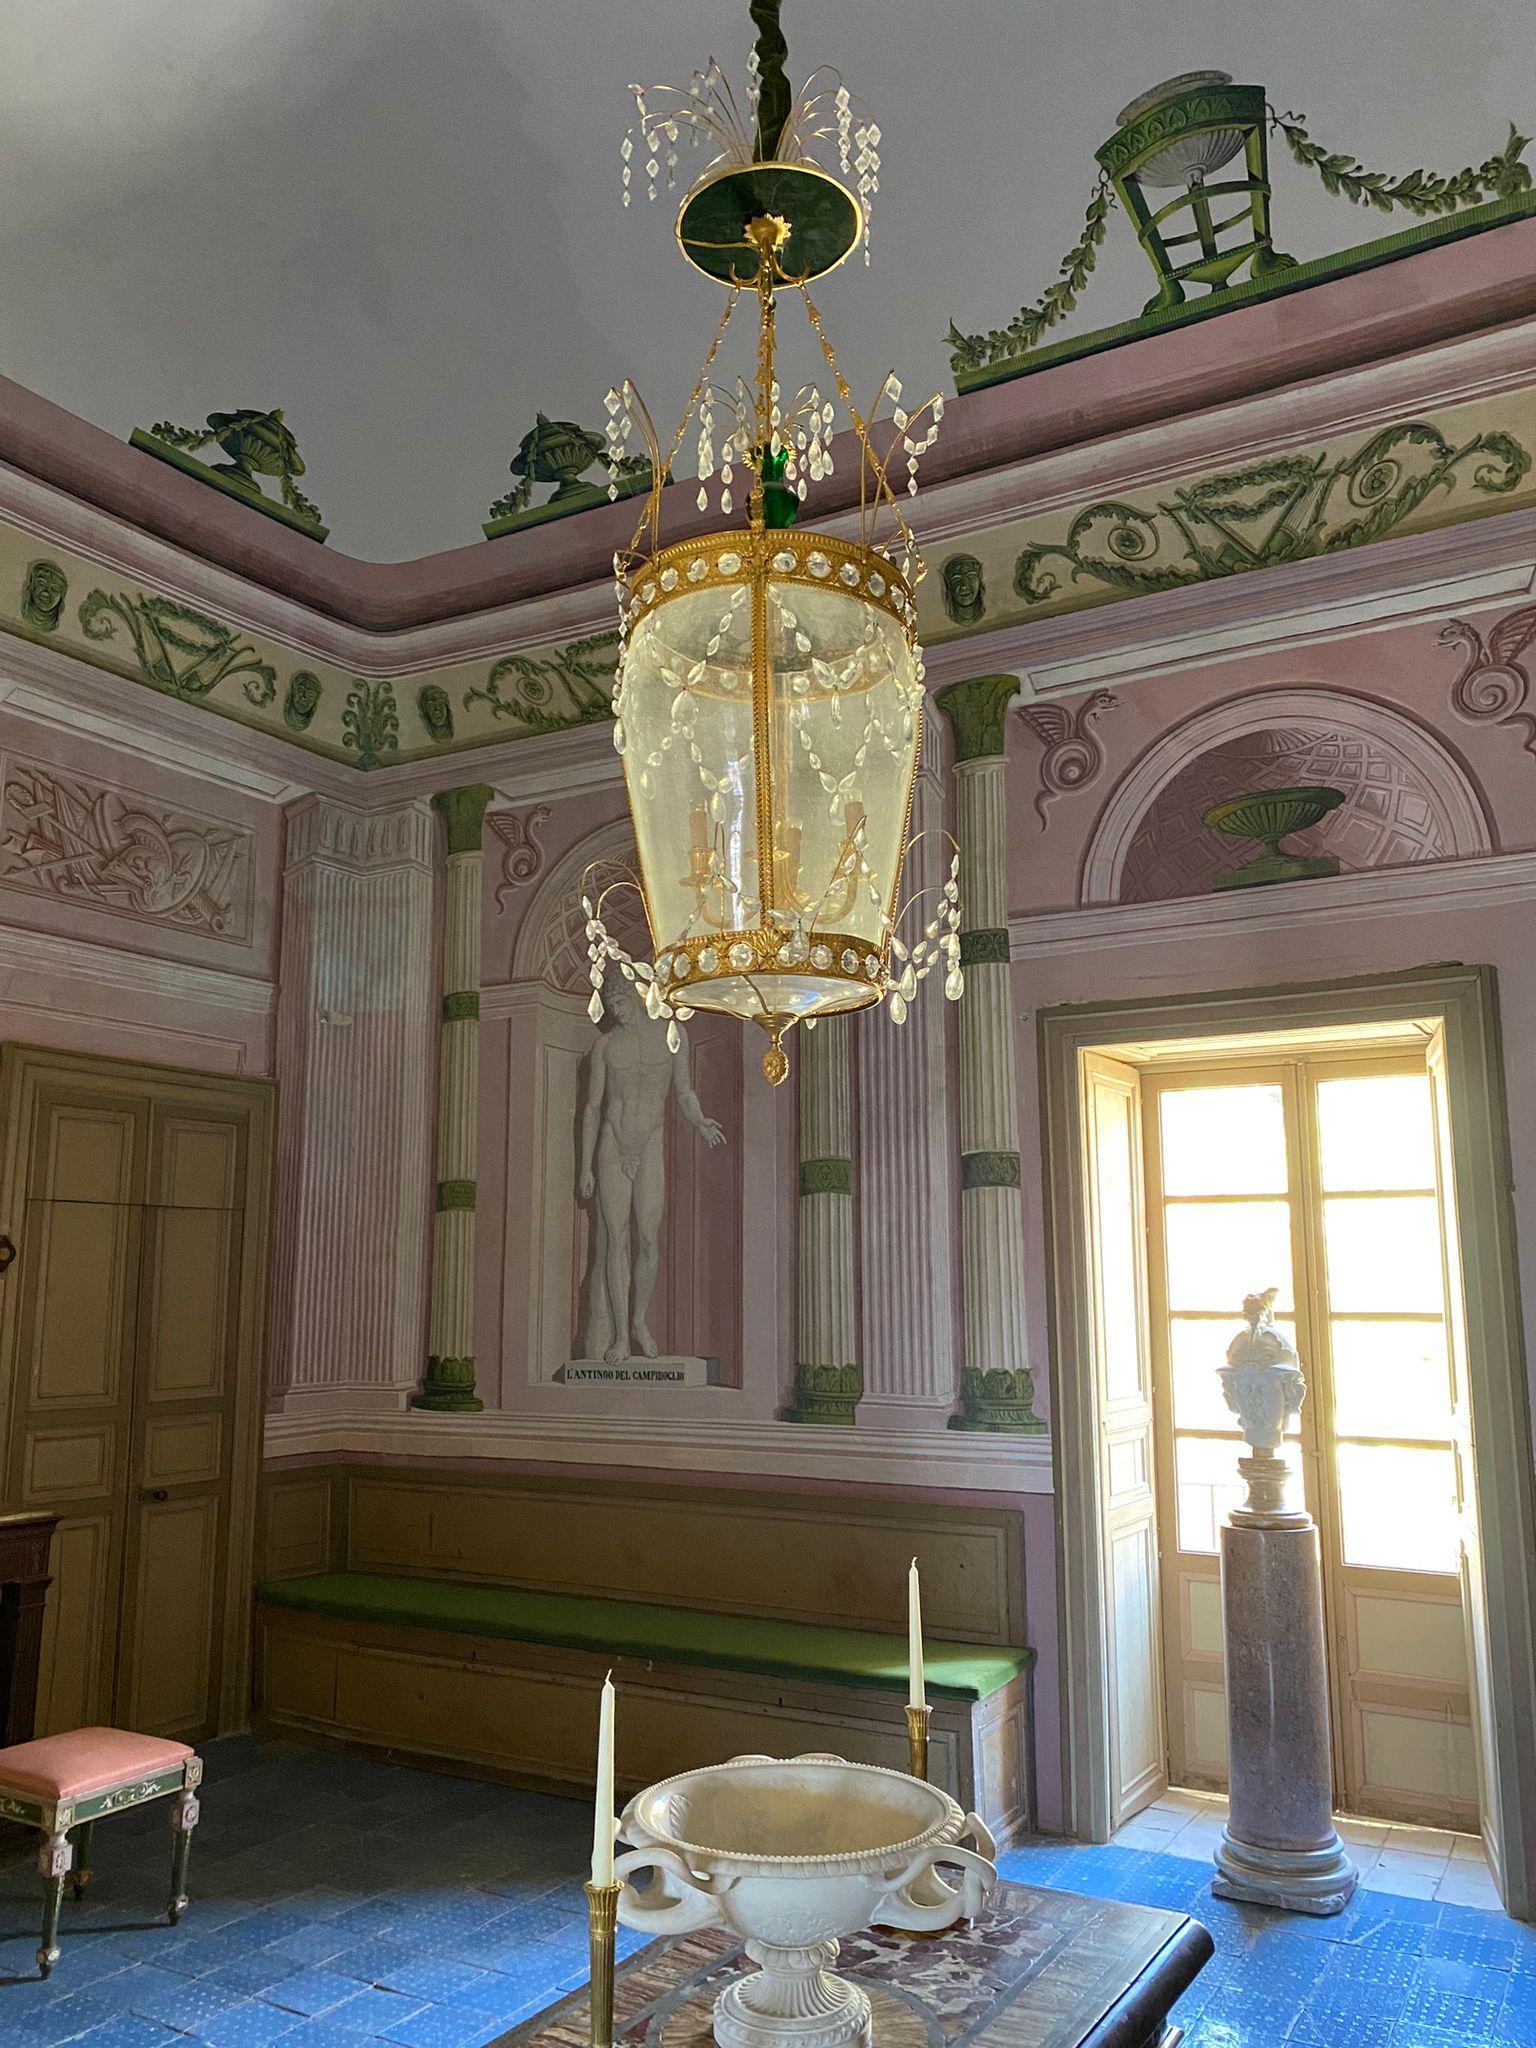 Baltic Large Green Lantern, replica from Pavlovsk Palace’s main room  For Sale